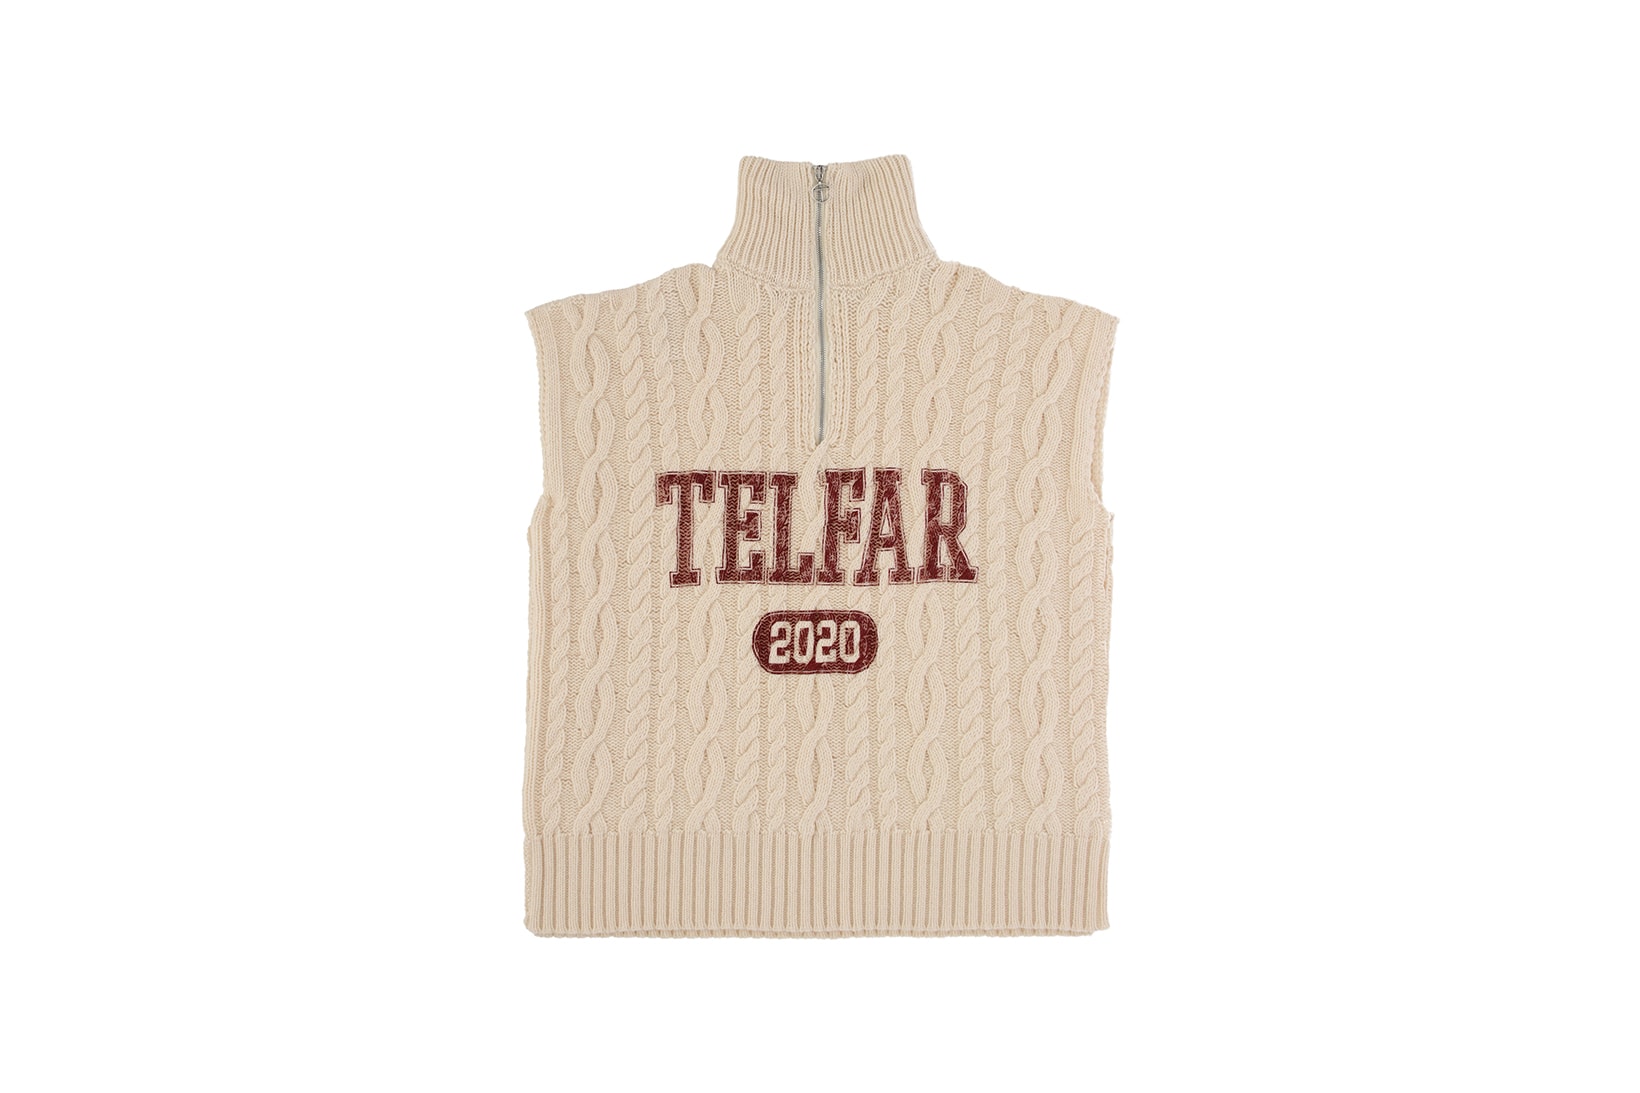 telfar cable knit knitwear sideless sweater winter apparel off white red